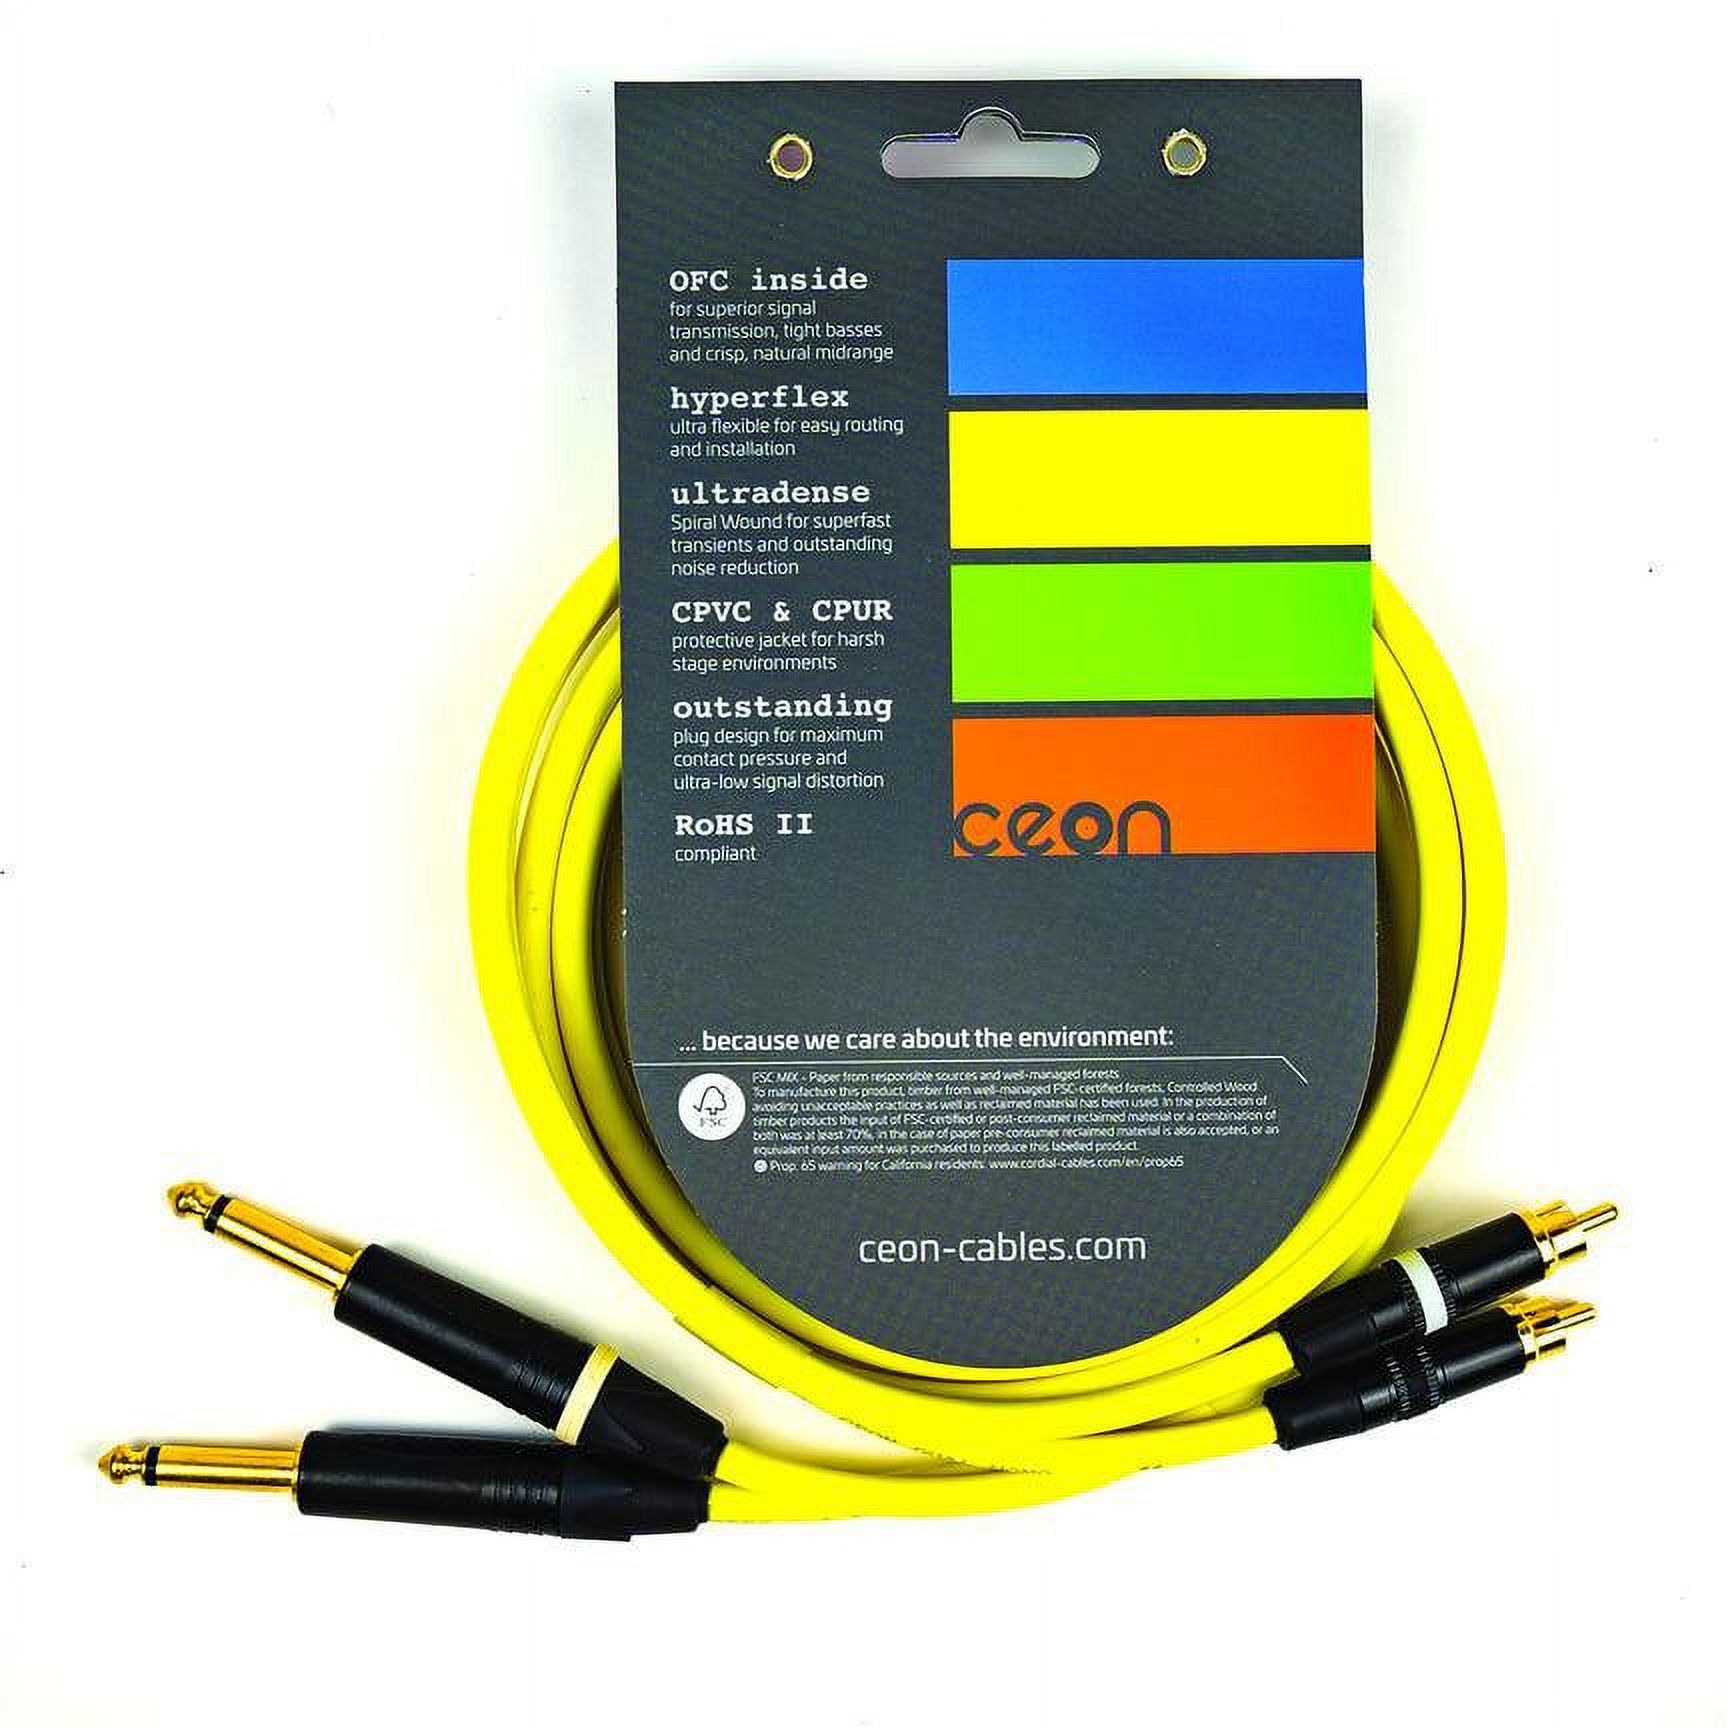 Cordial Cables 3719597 0.25 in. TS Choice Stereo RCA Premium DJ Dual & Mono Black Light - Ceon Series - 10 ft. Cable, Neon Yellow - image 2 of 2